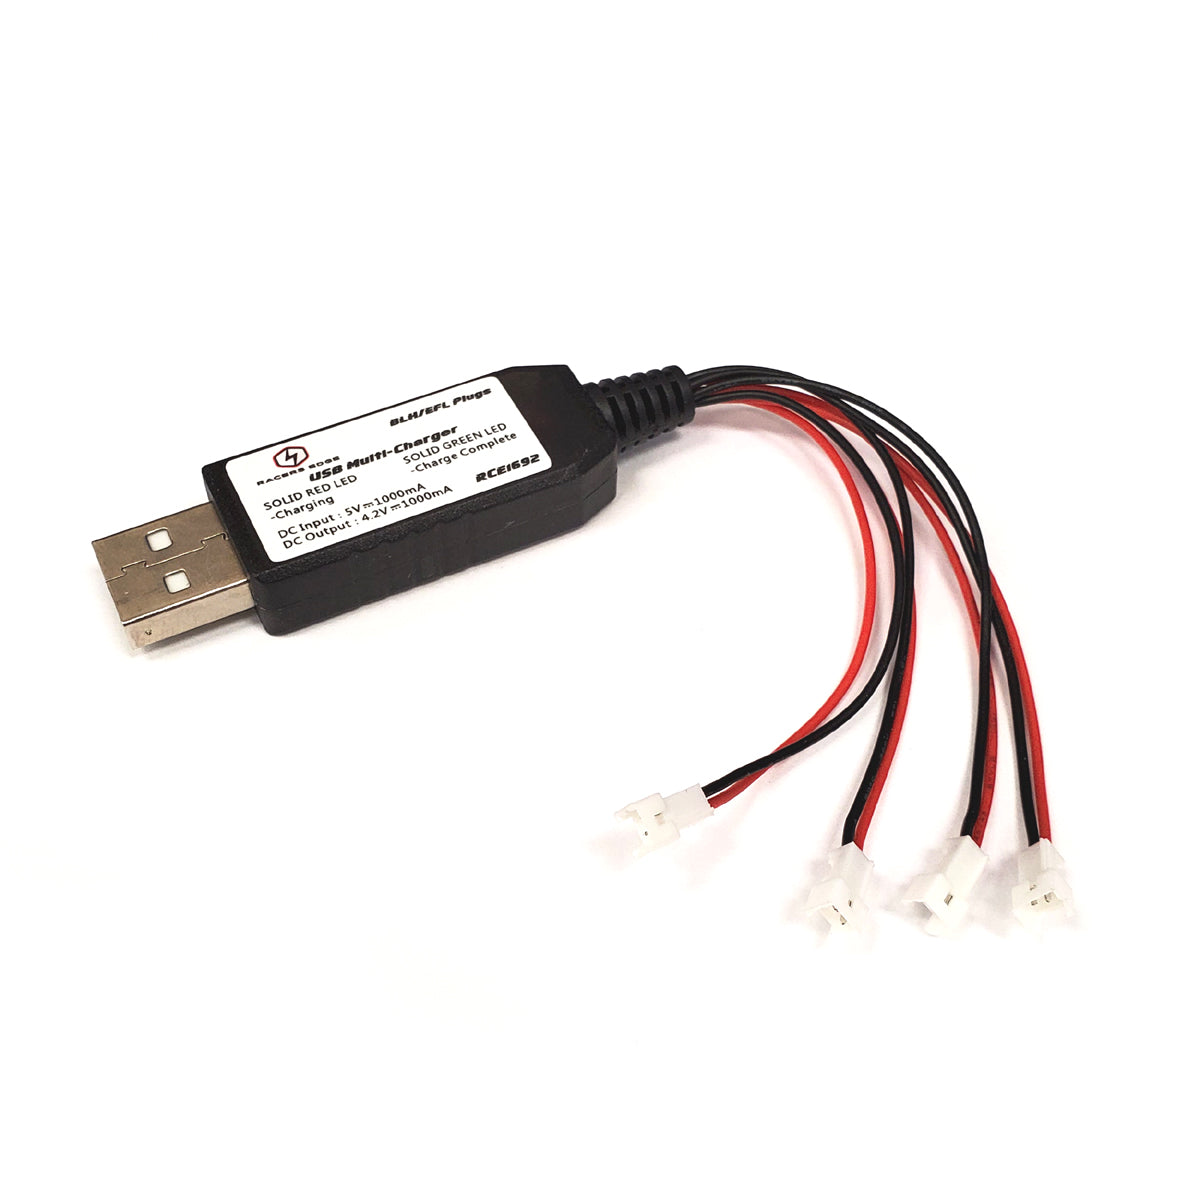 RACERS EDGE RCE1692 USB Multi-Charger for Charging Up To 4 1S Lipo Batteries at Once, Blade/E-flite Connector